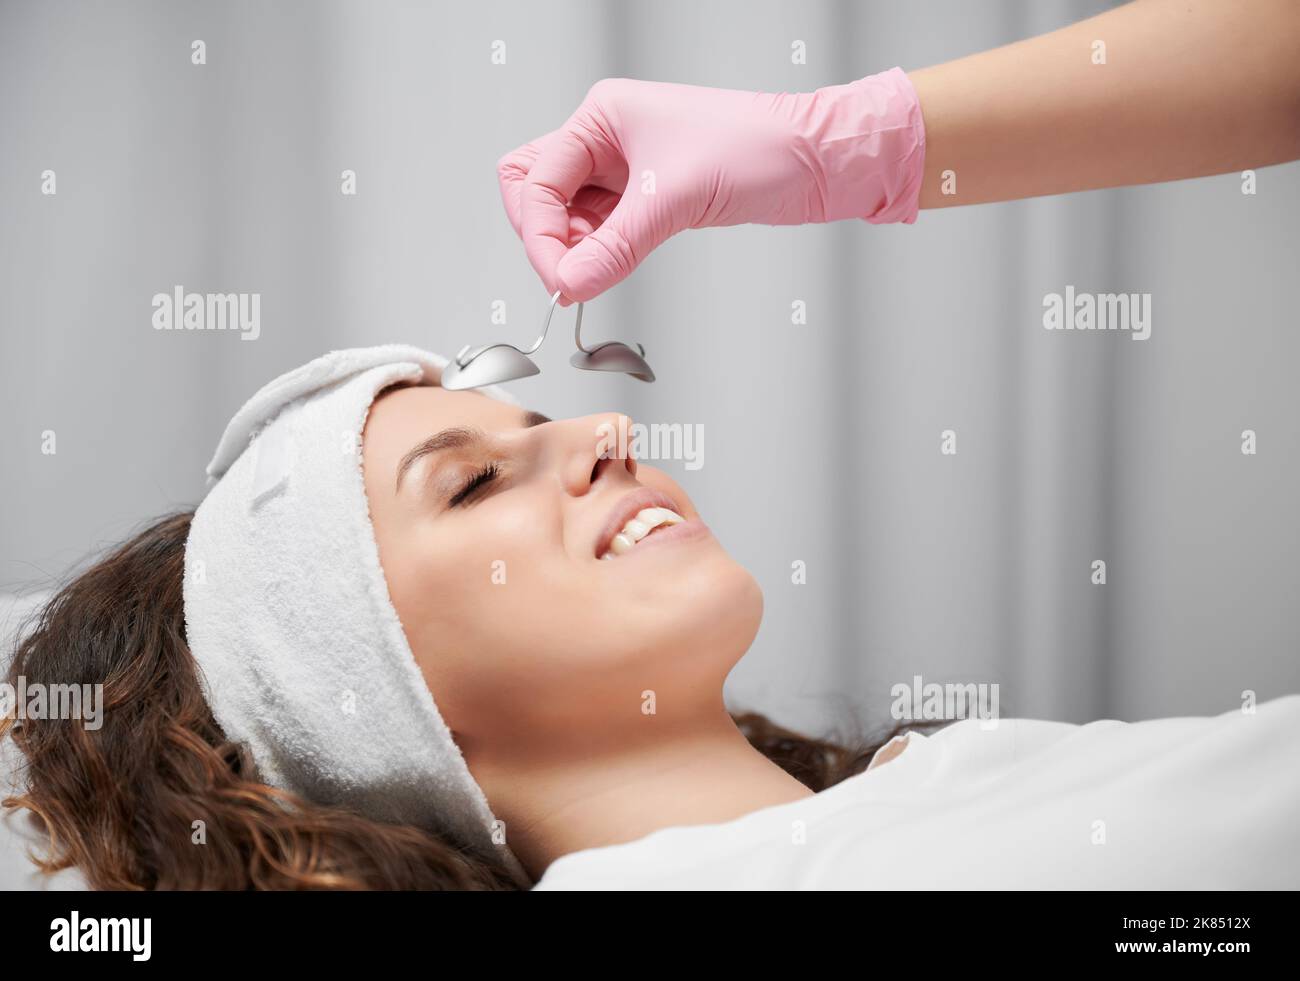 Close up of woman's face who lying with closed eyes at reception at beautician. Cropped view of hand in pink rubber glove keeping metal eye shield from laservision on short distance from face. Stock Photo